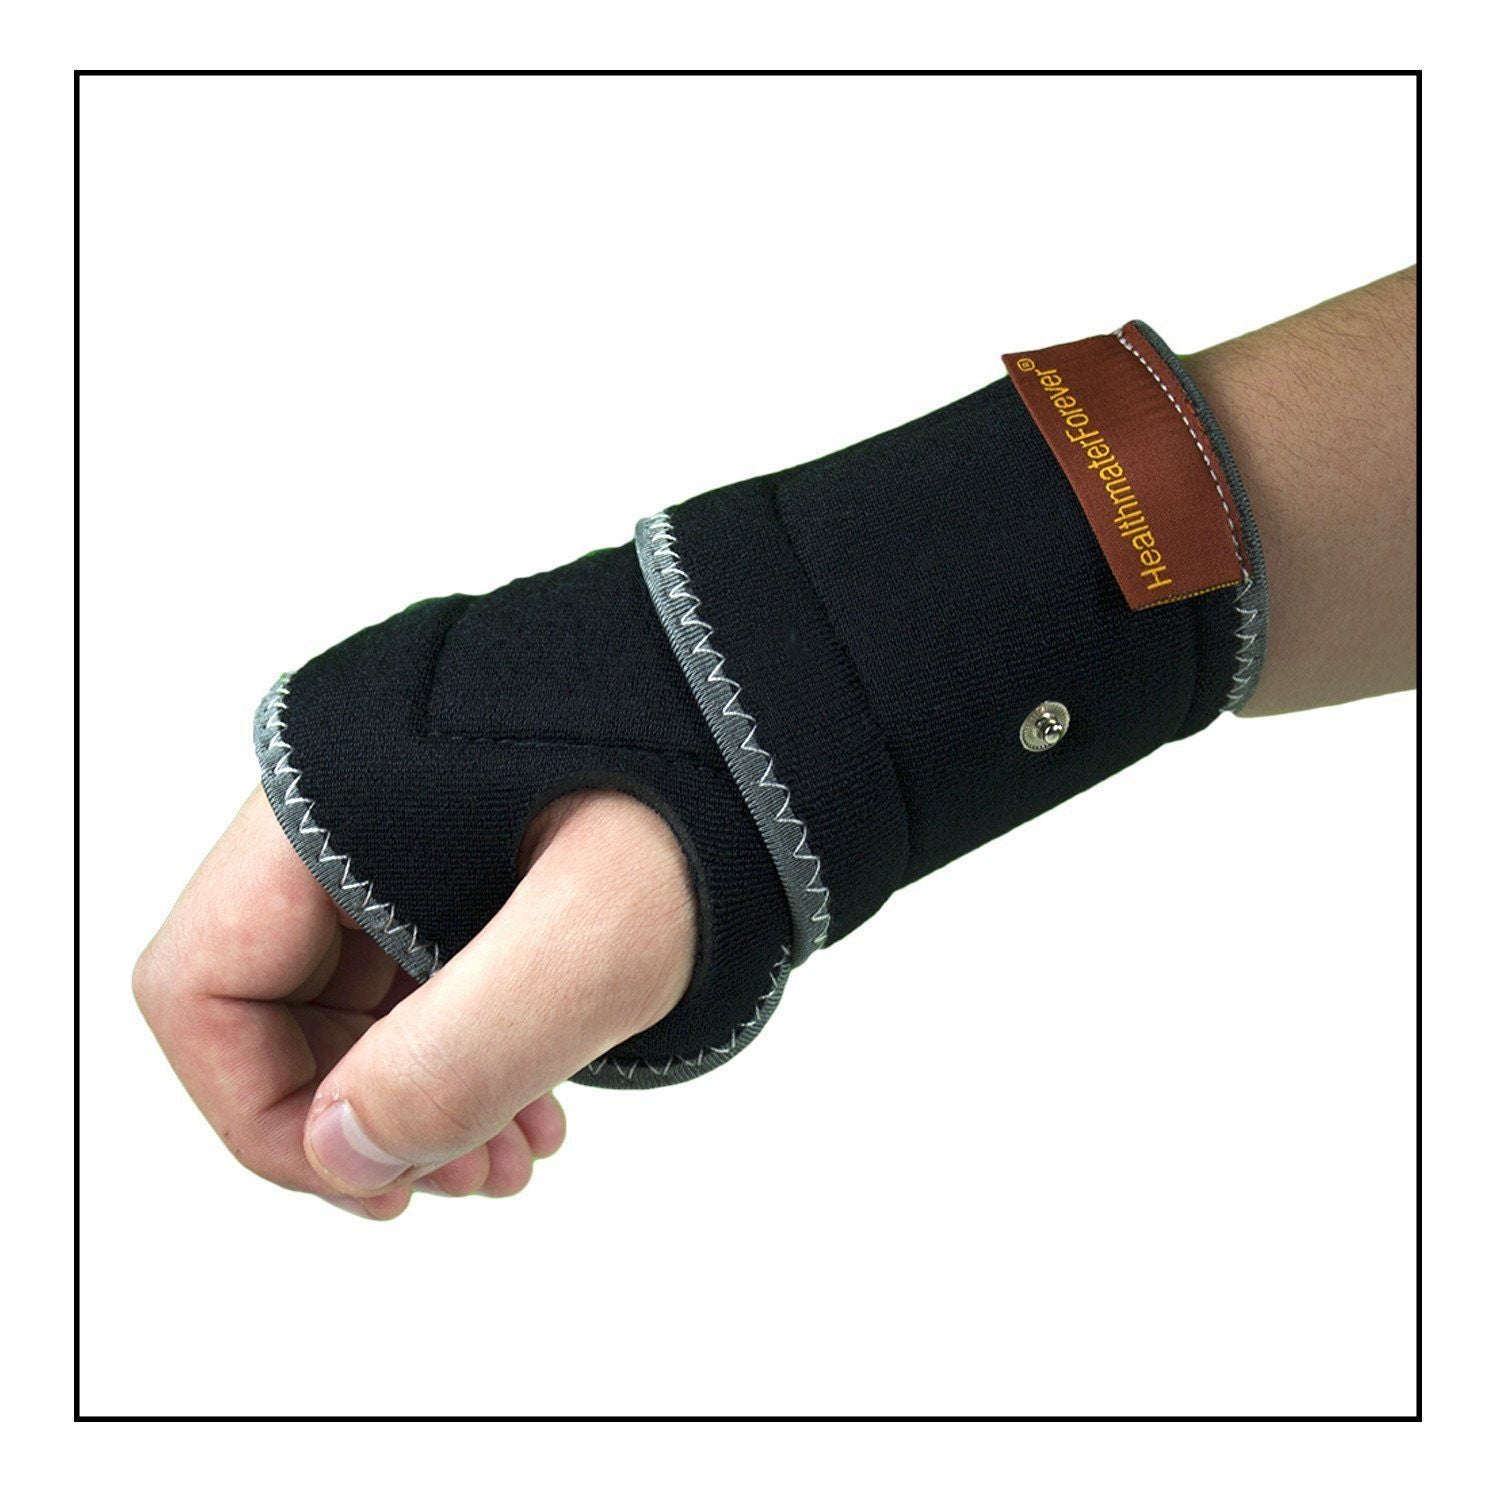 Conductive Wrist Brace / Support / Wrap for TENS & Muscle